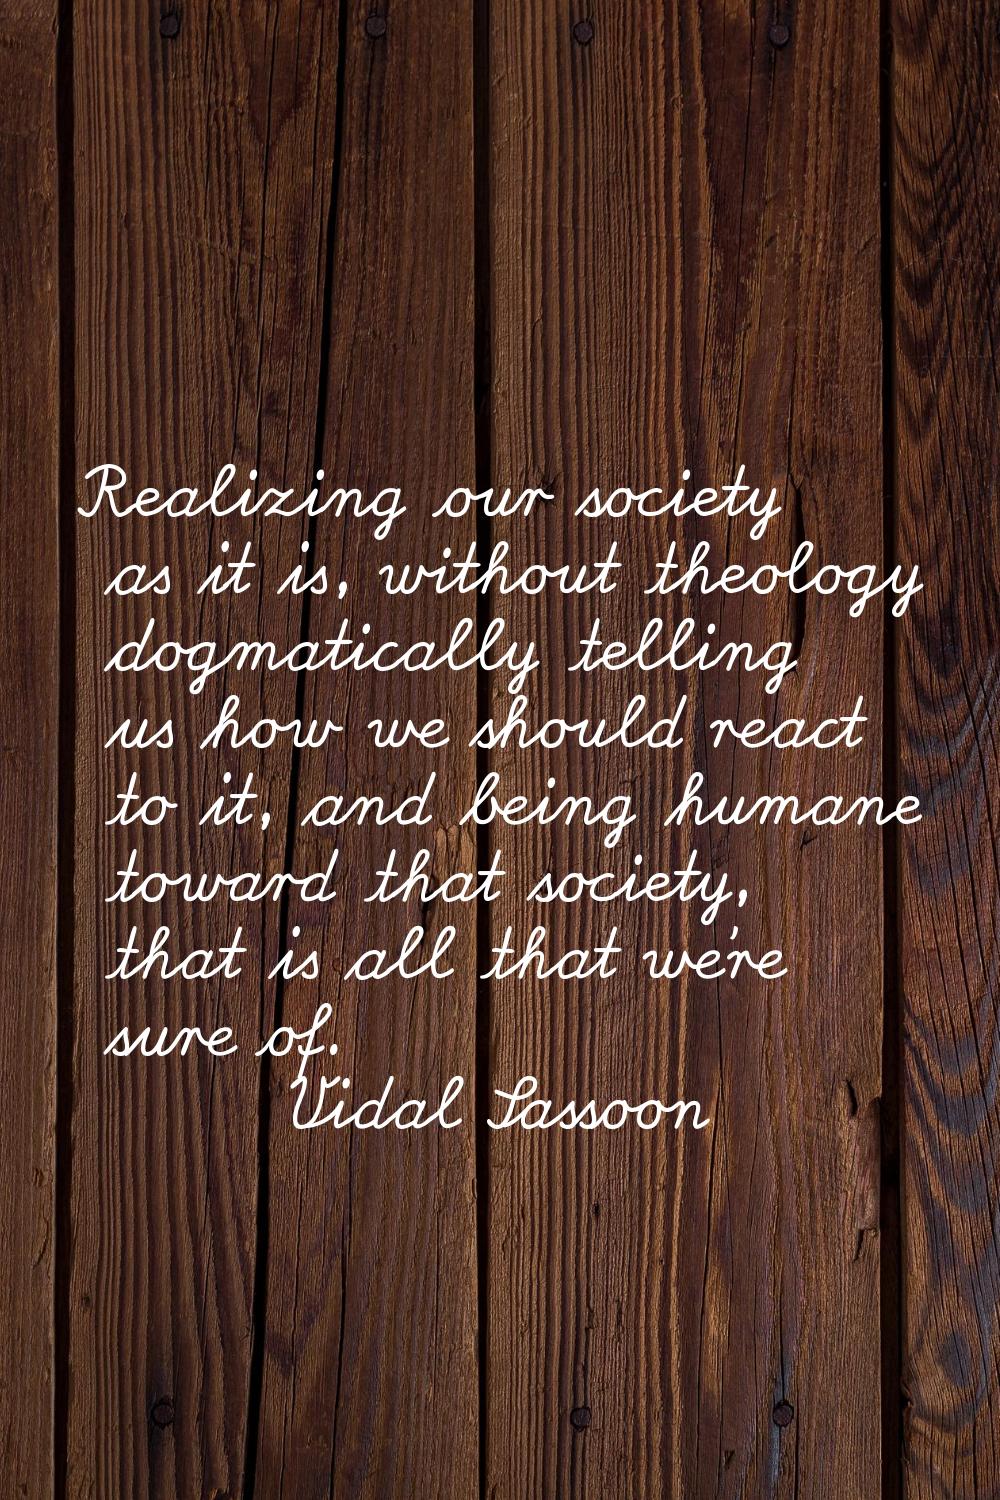 Realizing our society as it is, without theology dogmatically telling us how we should react to it,